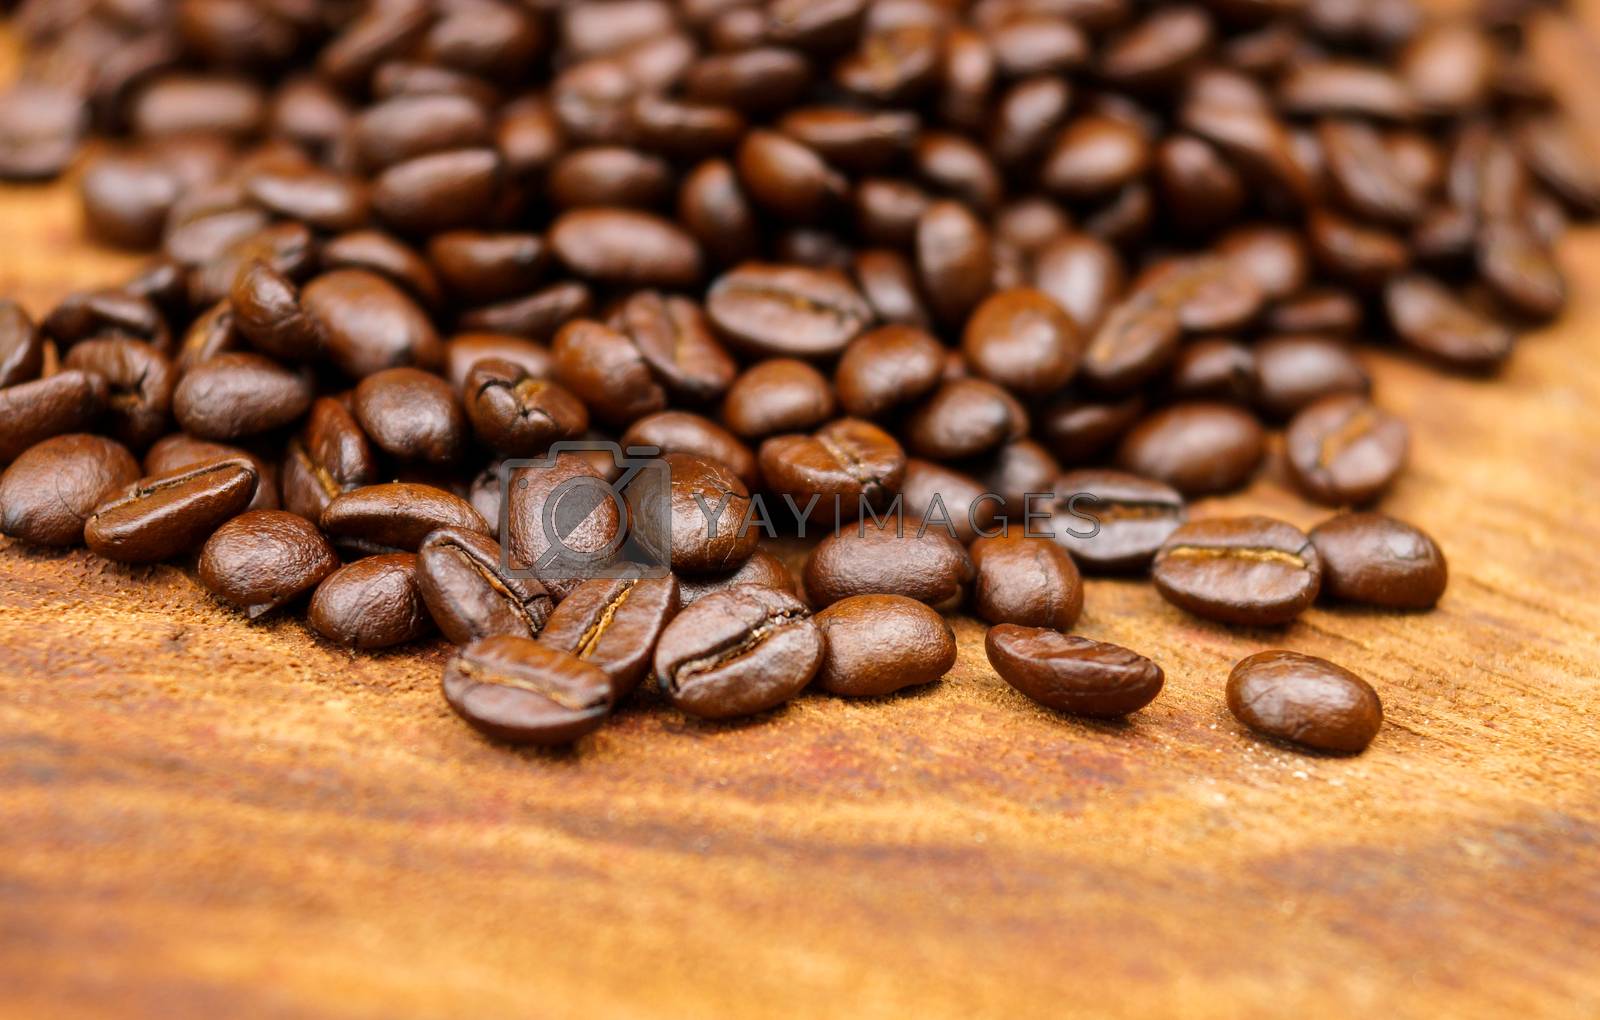 Royalty free image of Roasted coffee beans on wood. (Arabica coffee) by Noppharat_th